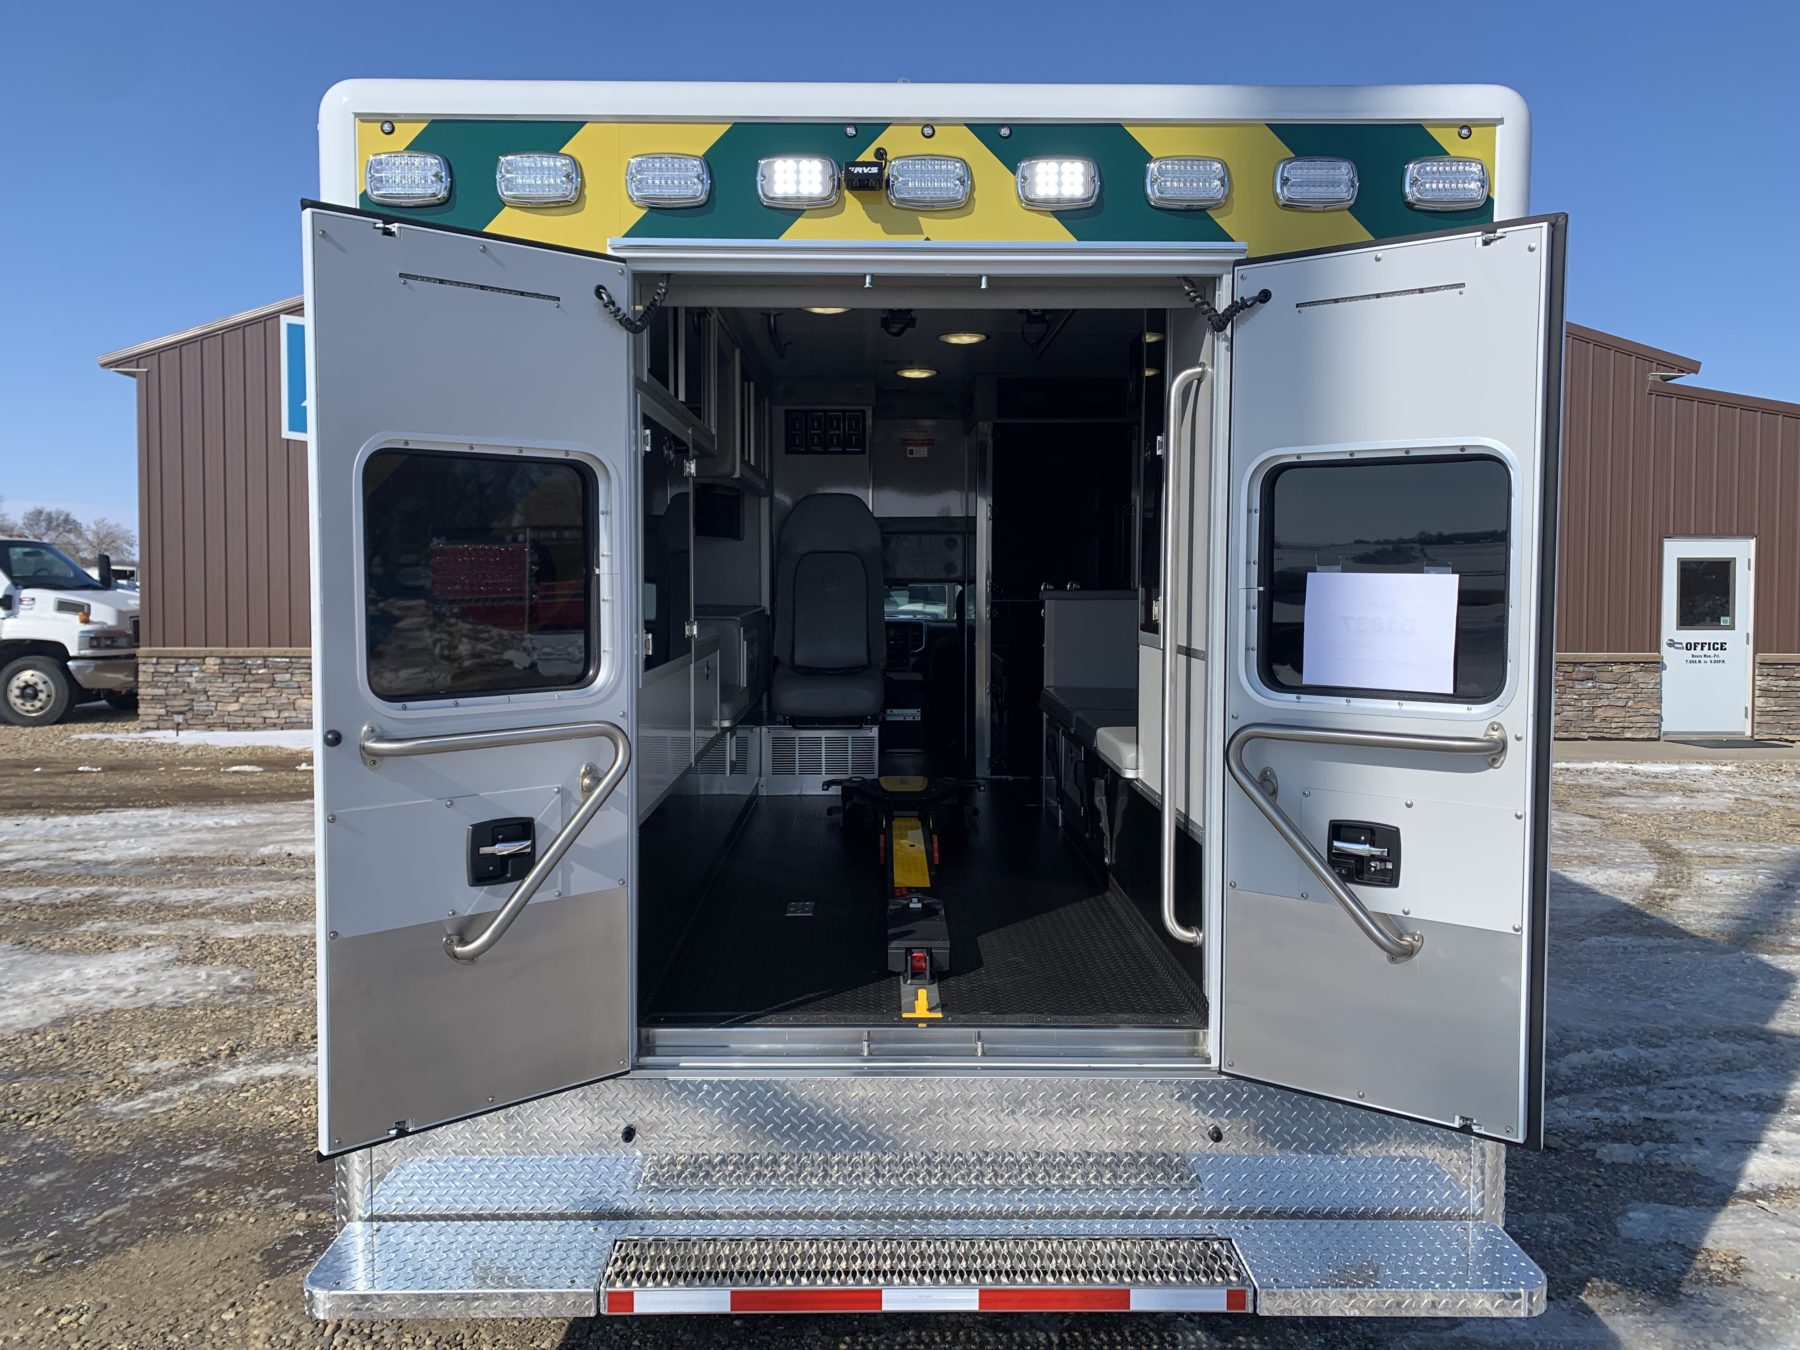 2022 Ram 5500 4x4 Heavy Duty Ambulance For Sale – Picture 8